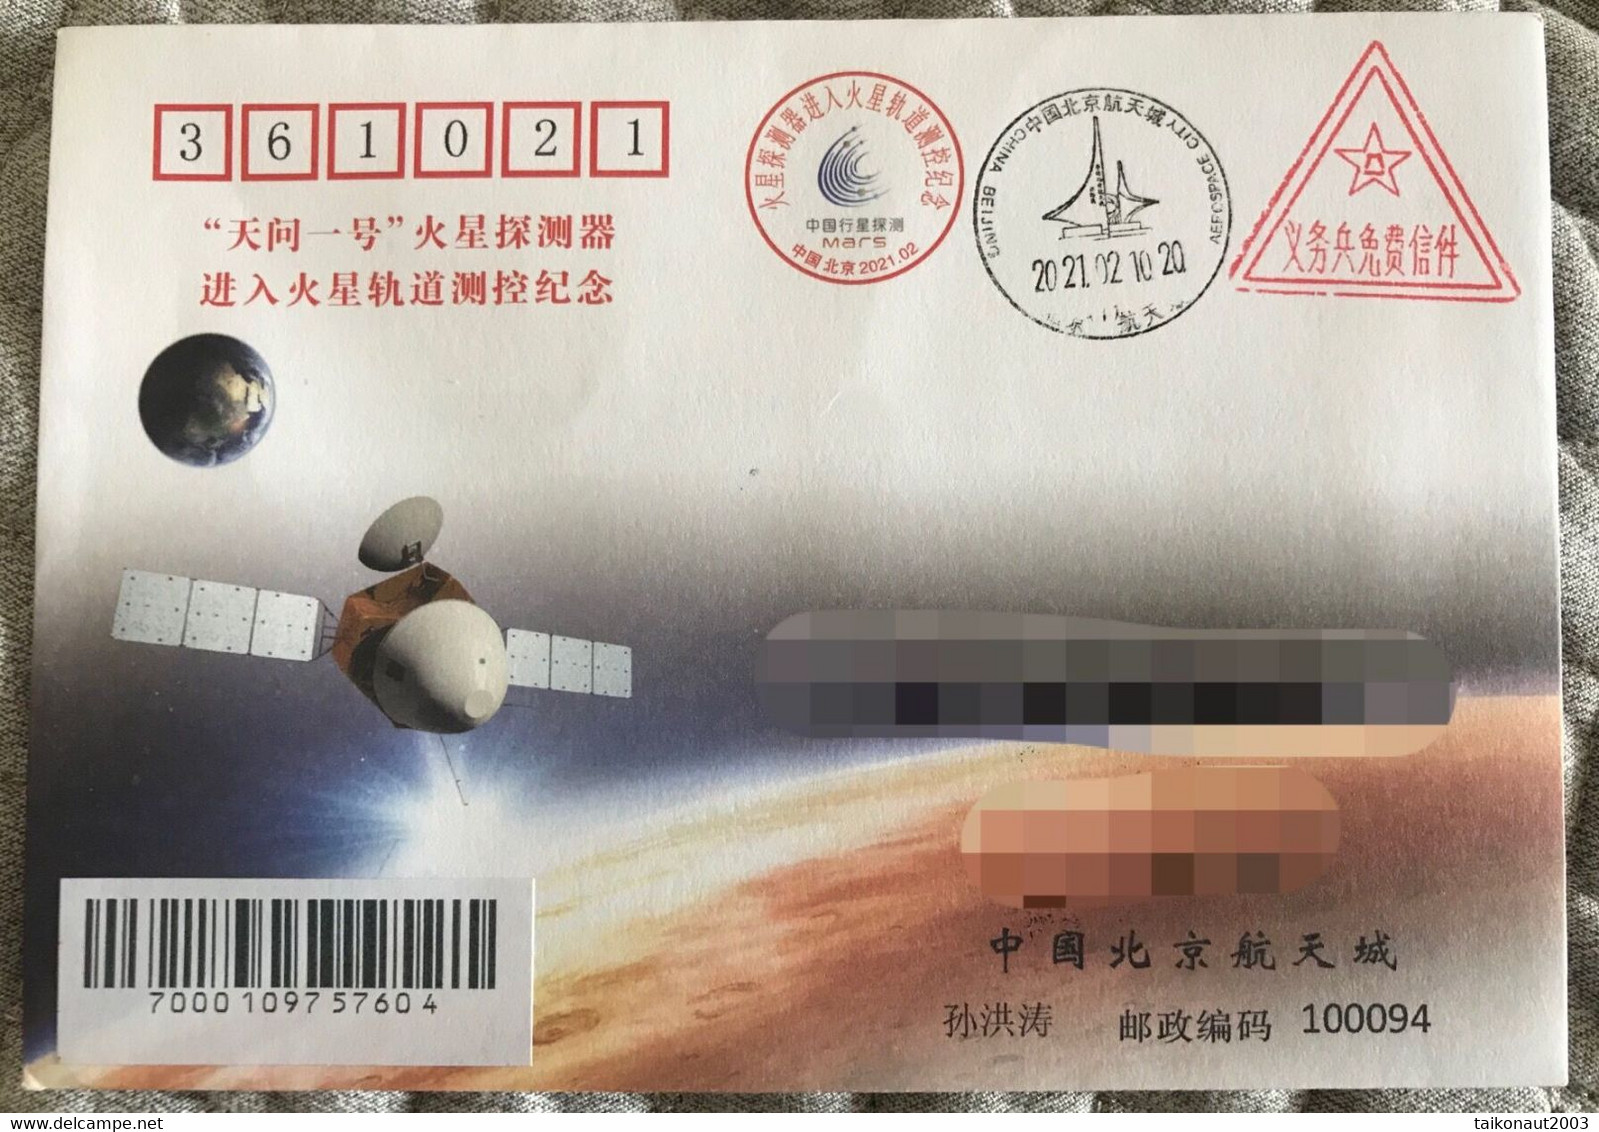 China Space 2021 Tianwen-1 Enter Mars Orbit Control Cover, Beijing Space City - Asia